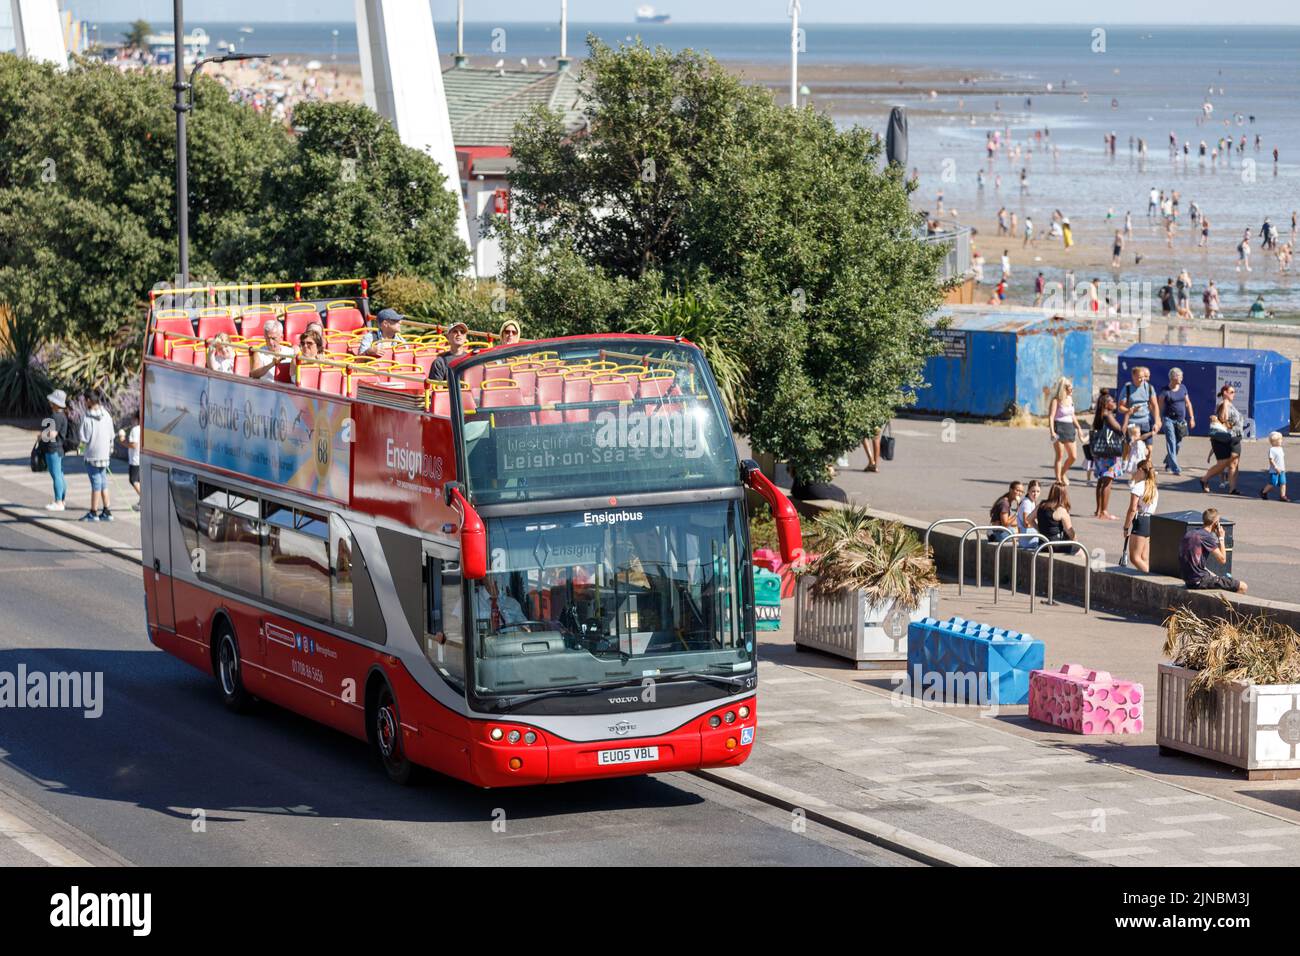 Open top red bus at the seaside on a sightseeing tour of Southend, with passenger on the top deck and tourists on the beach and promenade on a hot day Stock Photo